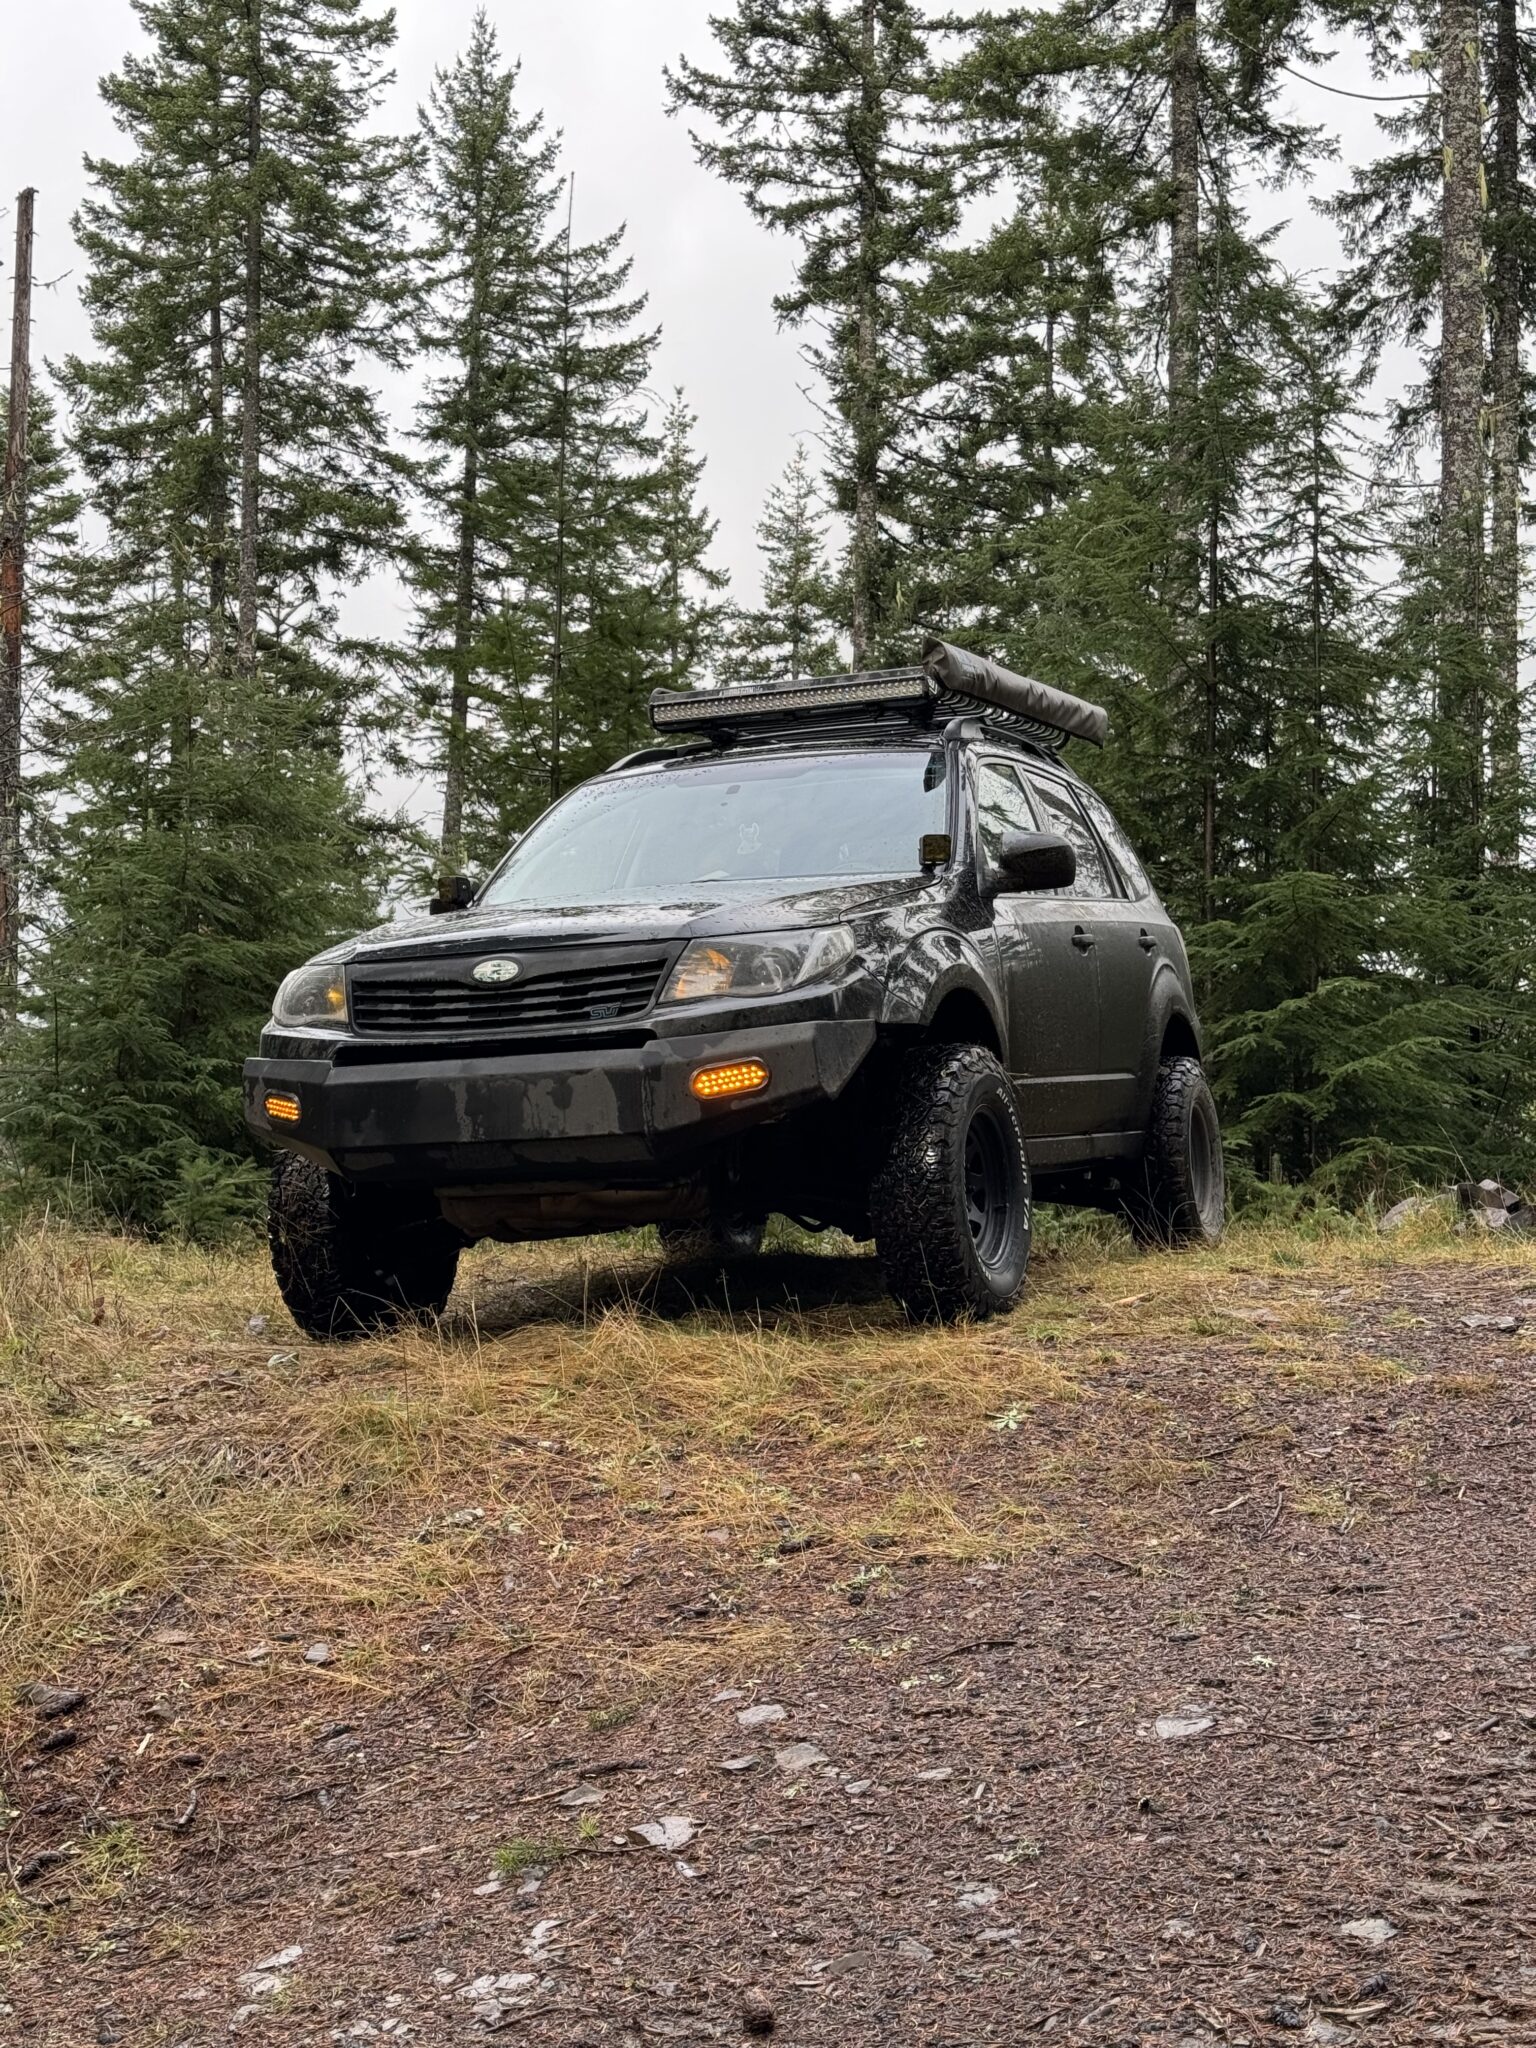 2010 subaru forester offroad with heavy duty tires